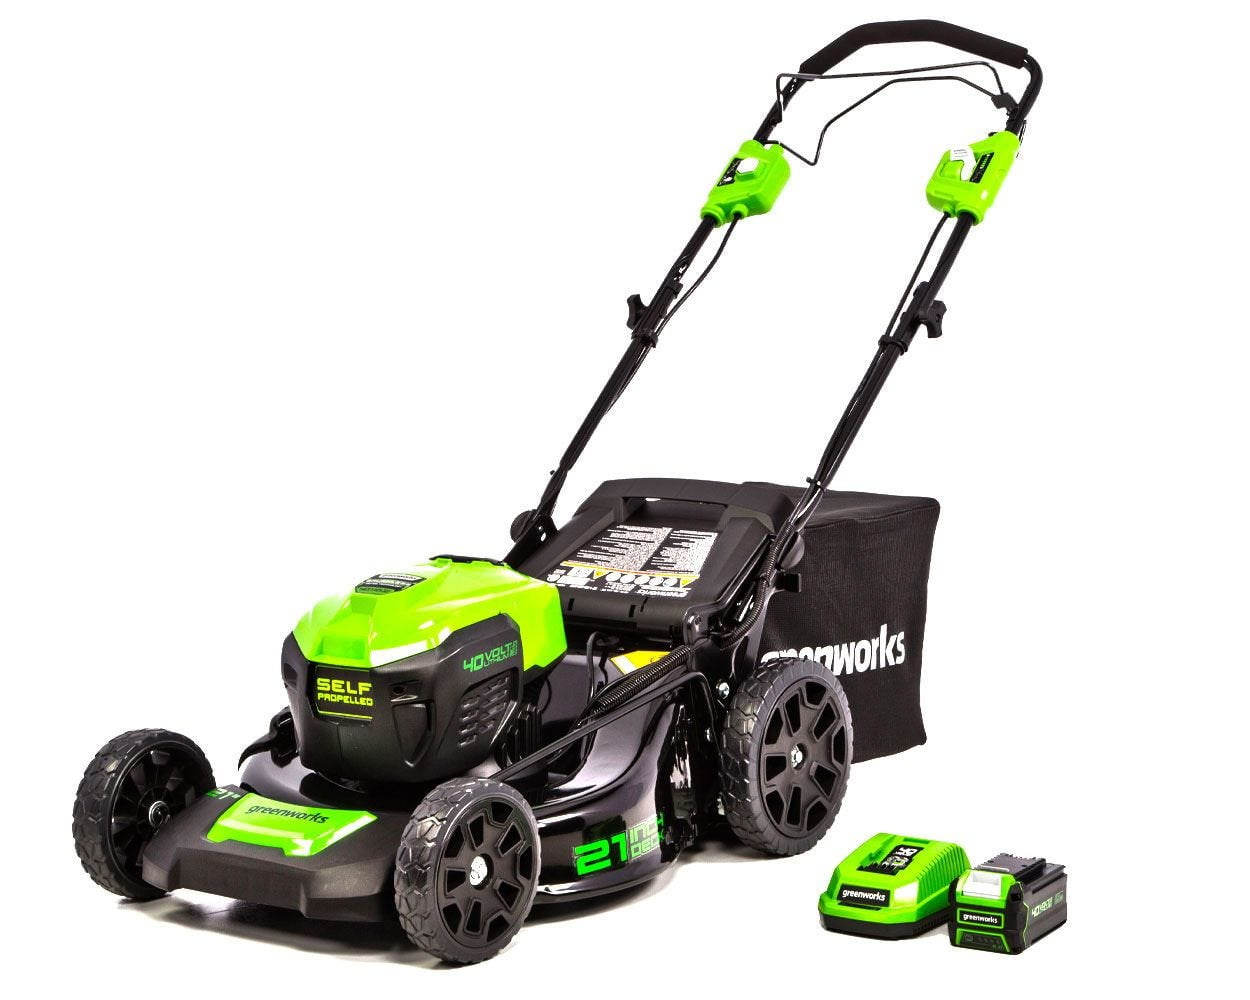 Greenworks 21-Inch 40V Self-Propelled Cordless Lawn Mower and 40V 5.0 AH Lithium Ion Battery with Charger 